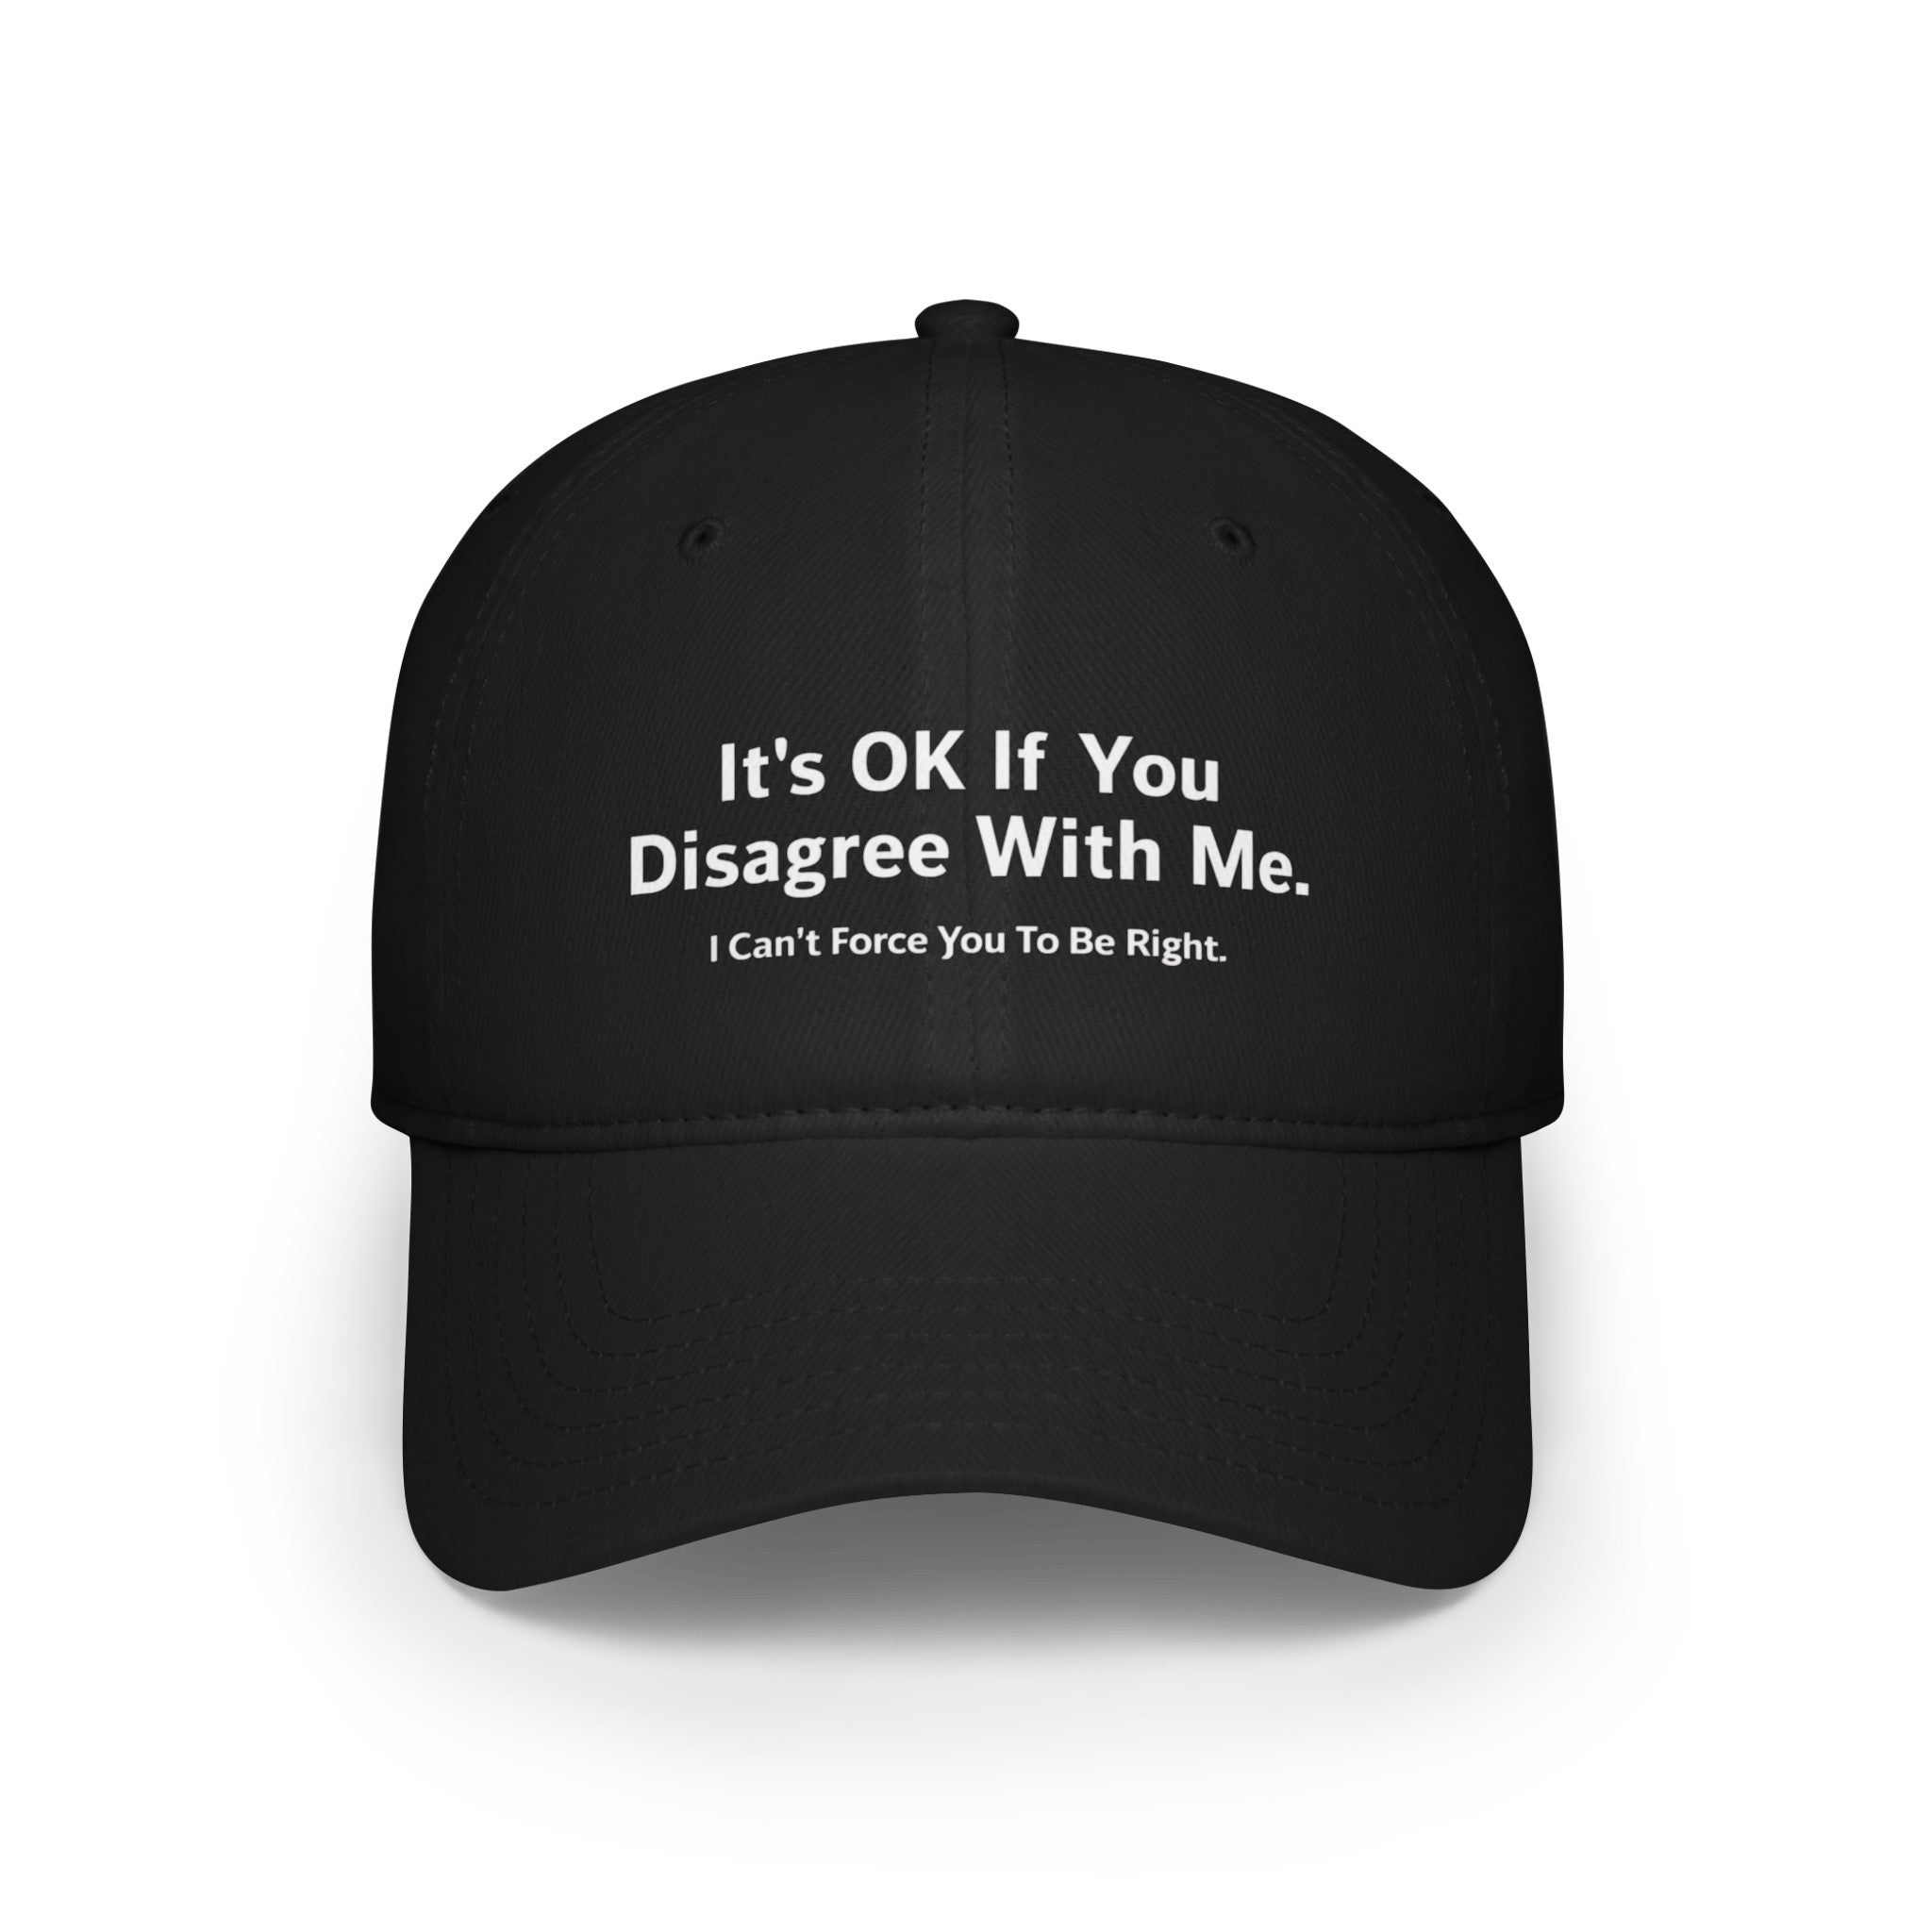 It's Ok If You Disagree With Me - Hat